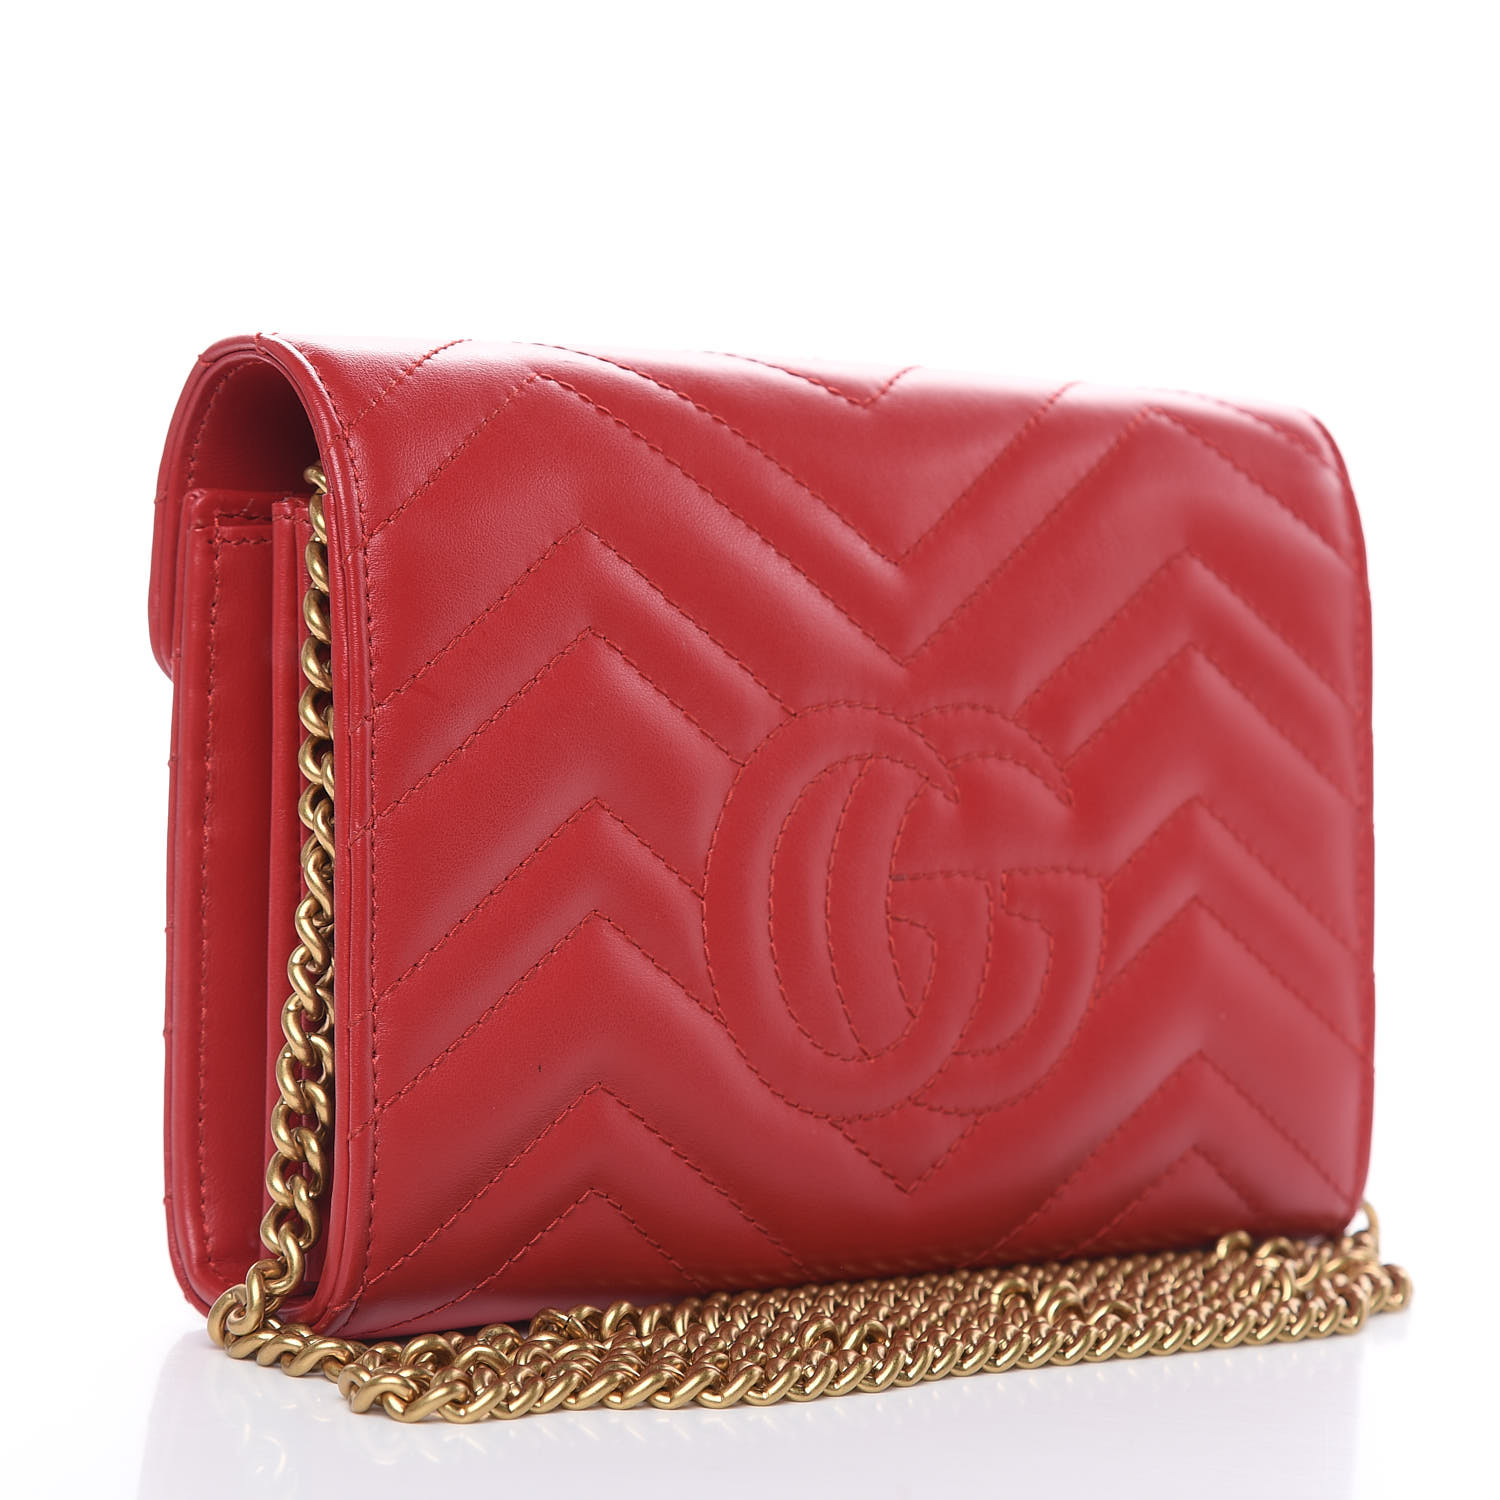 GUCCI Calfskin Matelasse GG Marmont Chain Wallet Red 457857